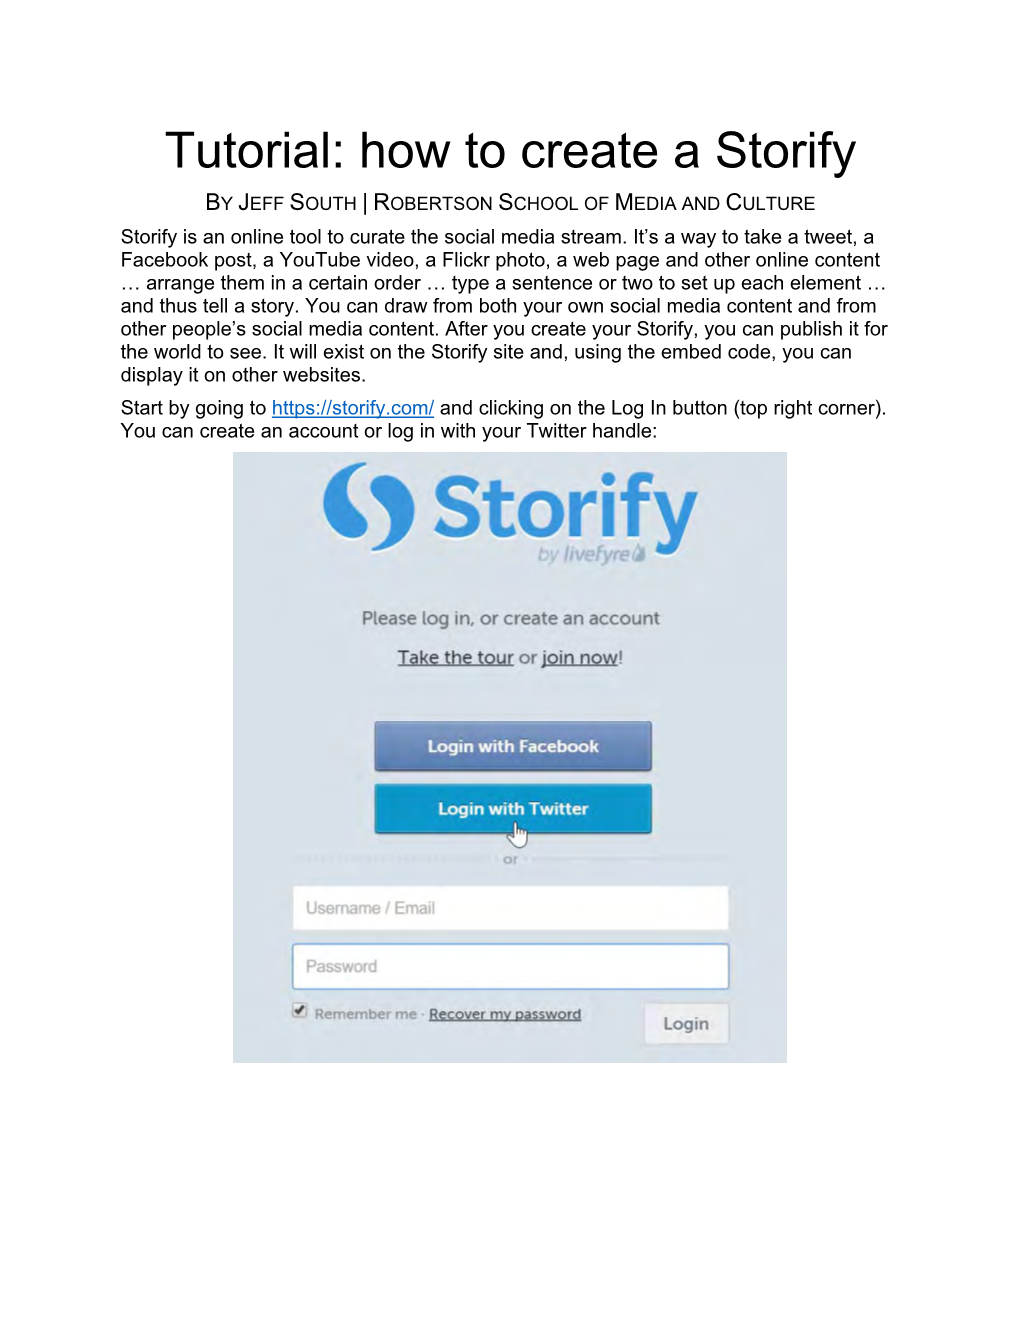 Tutorial: How to Create a Storify by JEFF SOUTH | ROBERTSON SCHOOL of MEDIA and CULTURE Storify Is an Online Tool to Curate the Social Media Stream